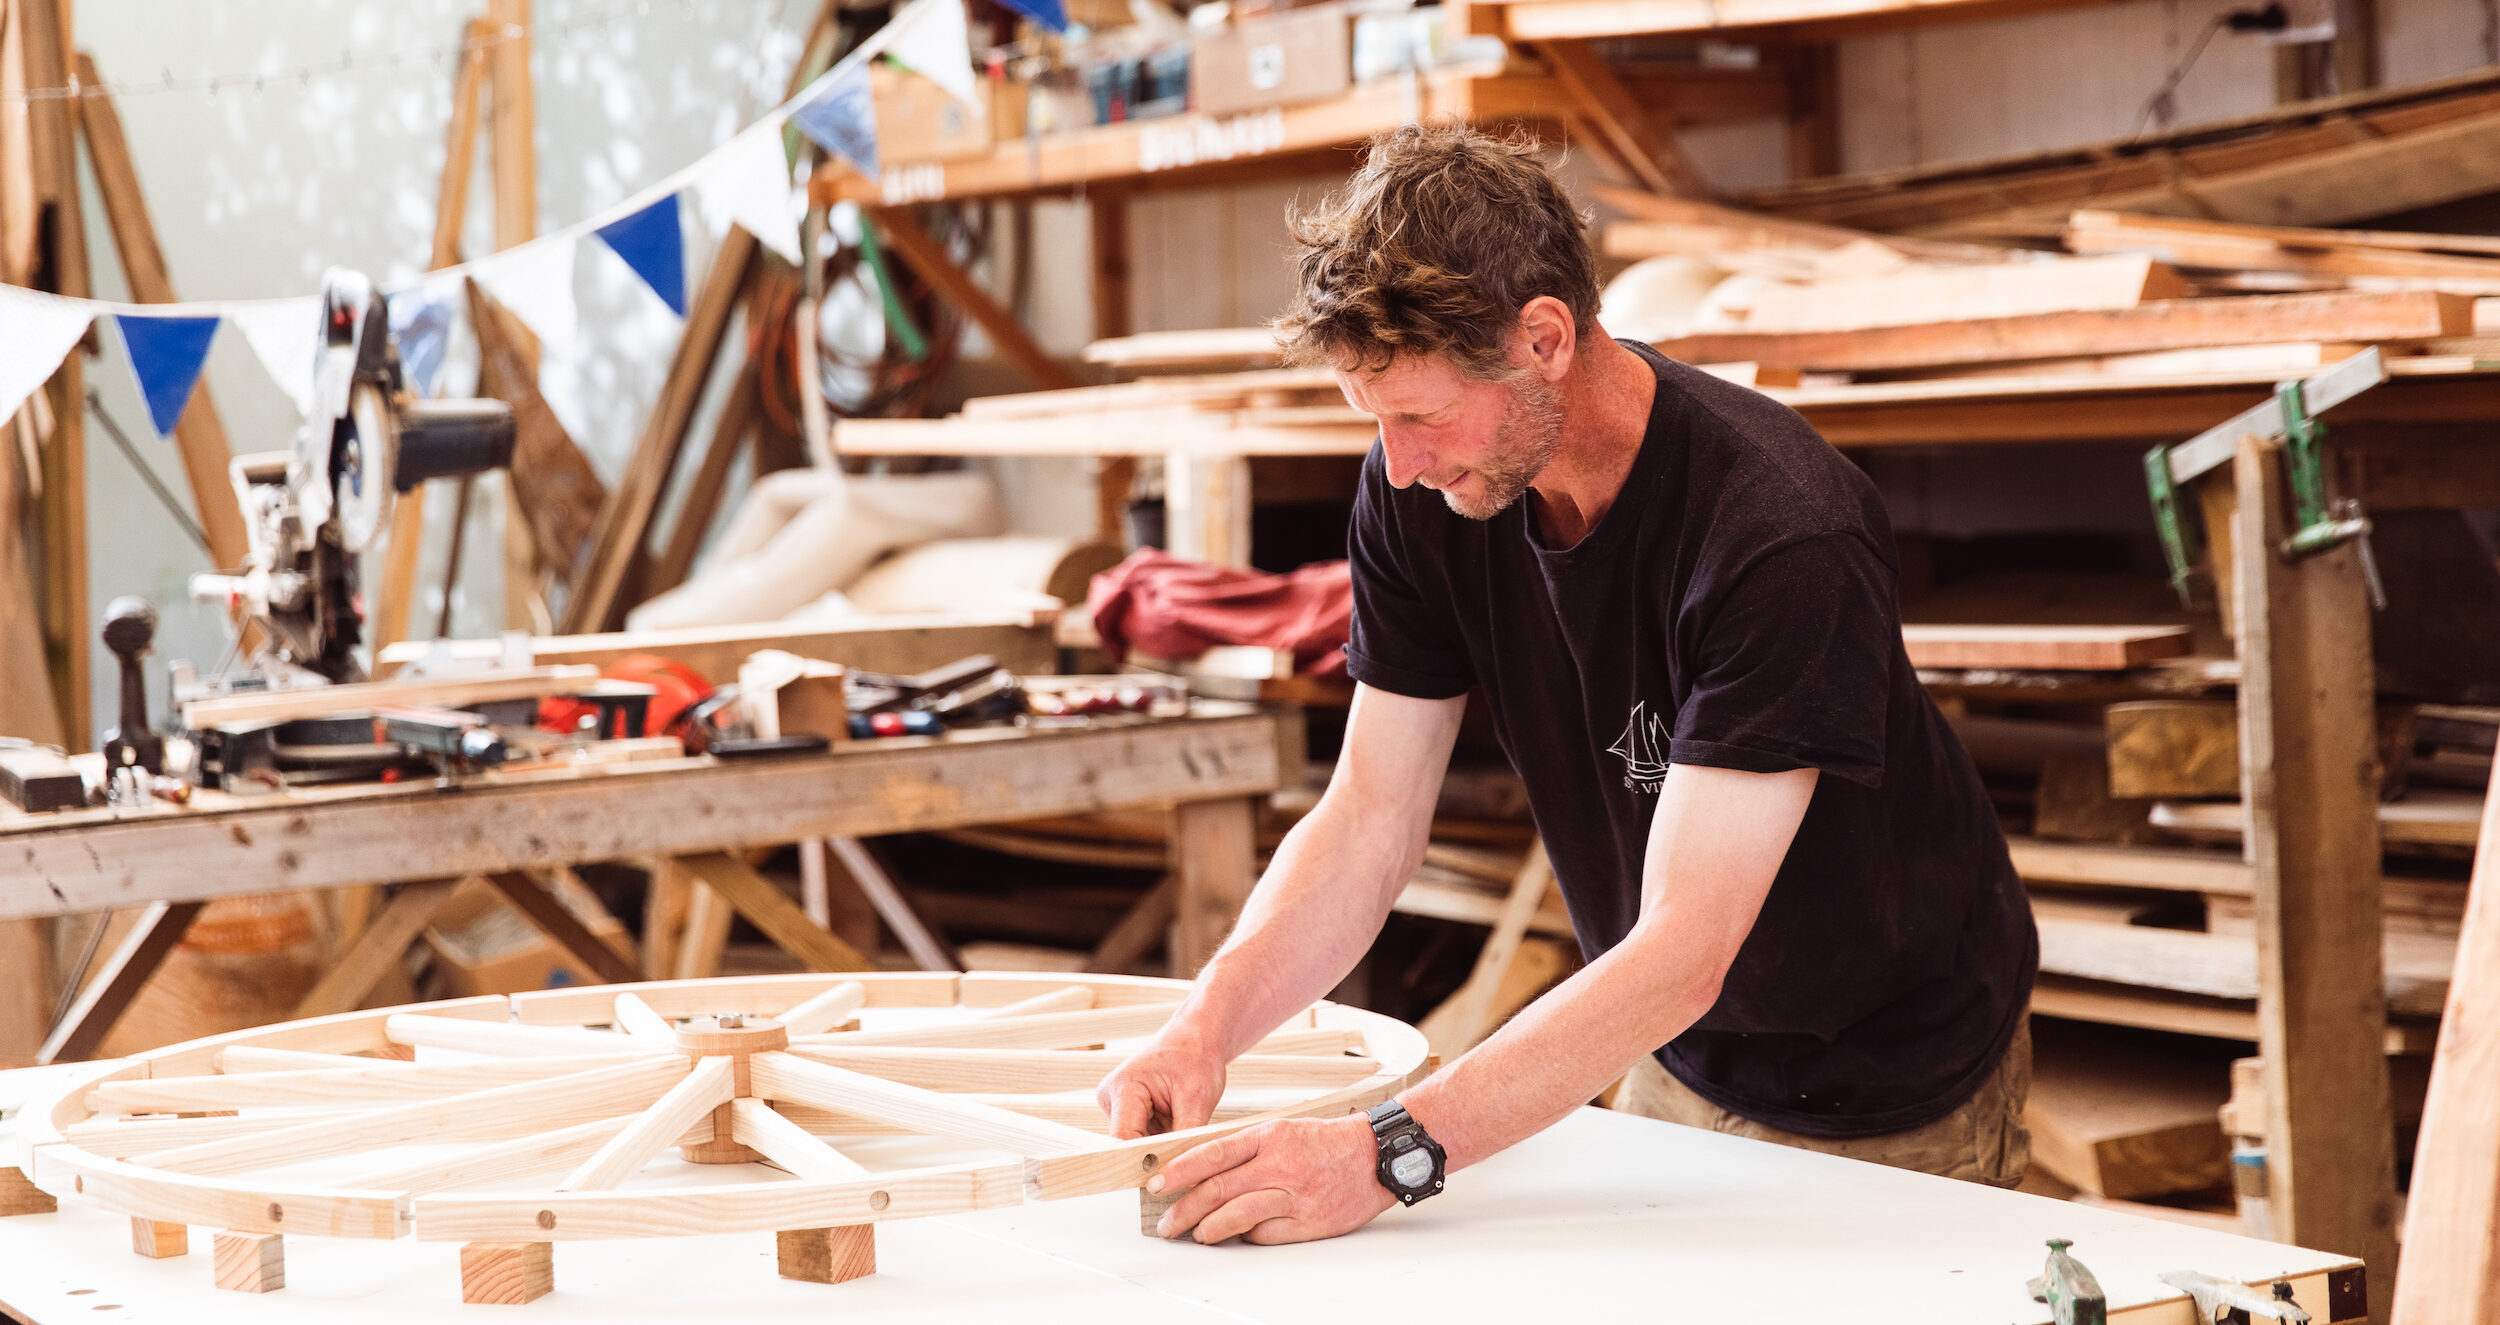 Endura is recreating a pedal bike with the help of Tom Loftus, a boat builder.